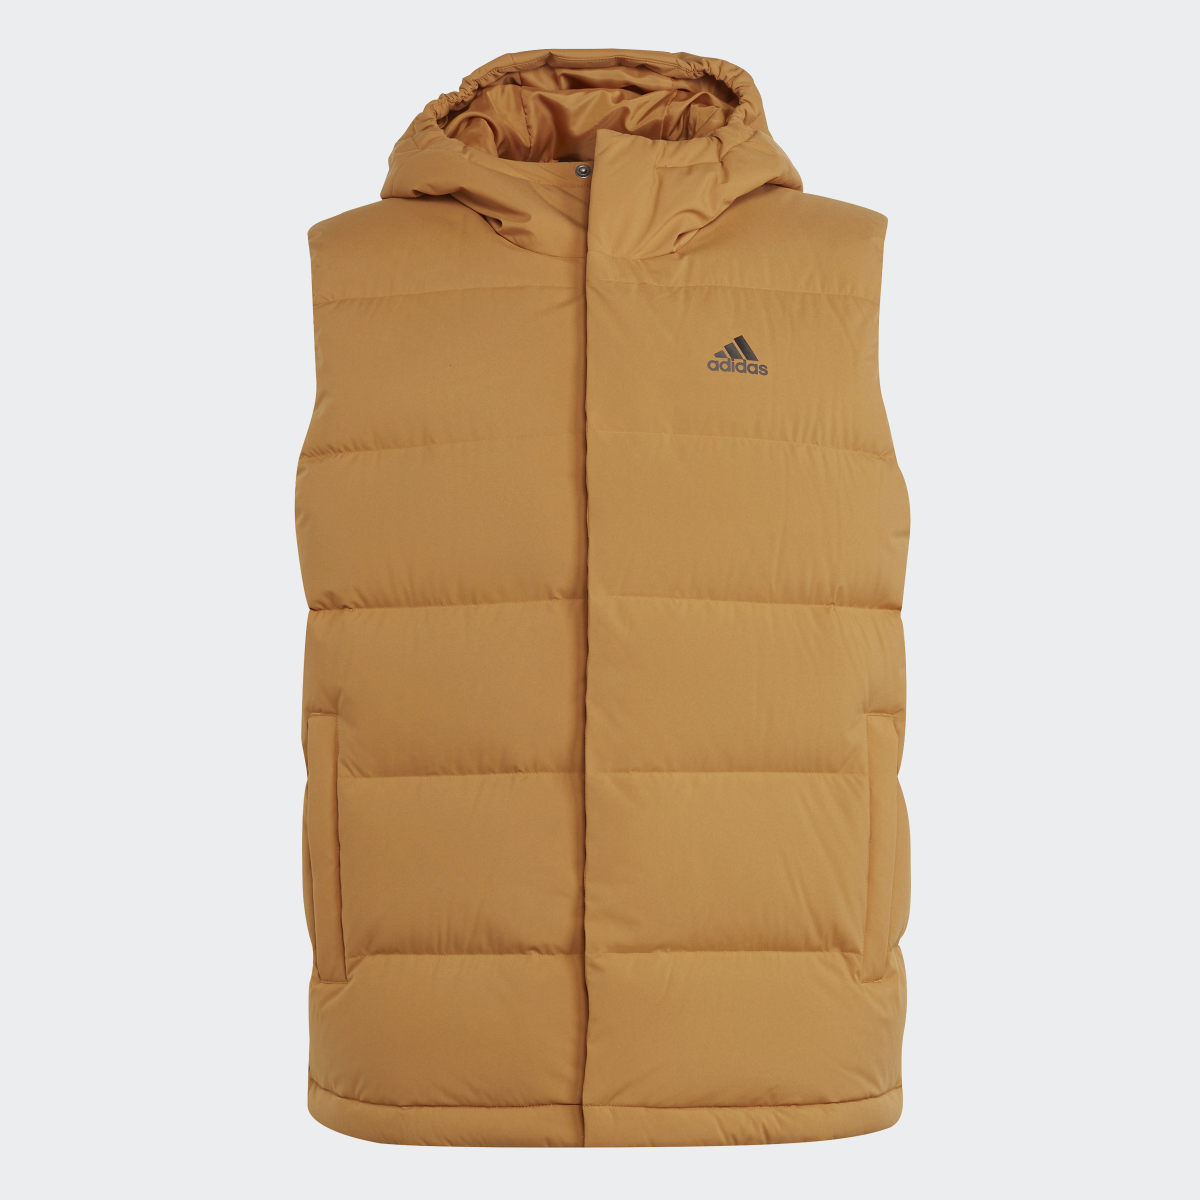 Adidas Helionic Hooded Down Vest. 5